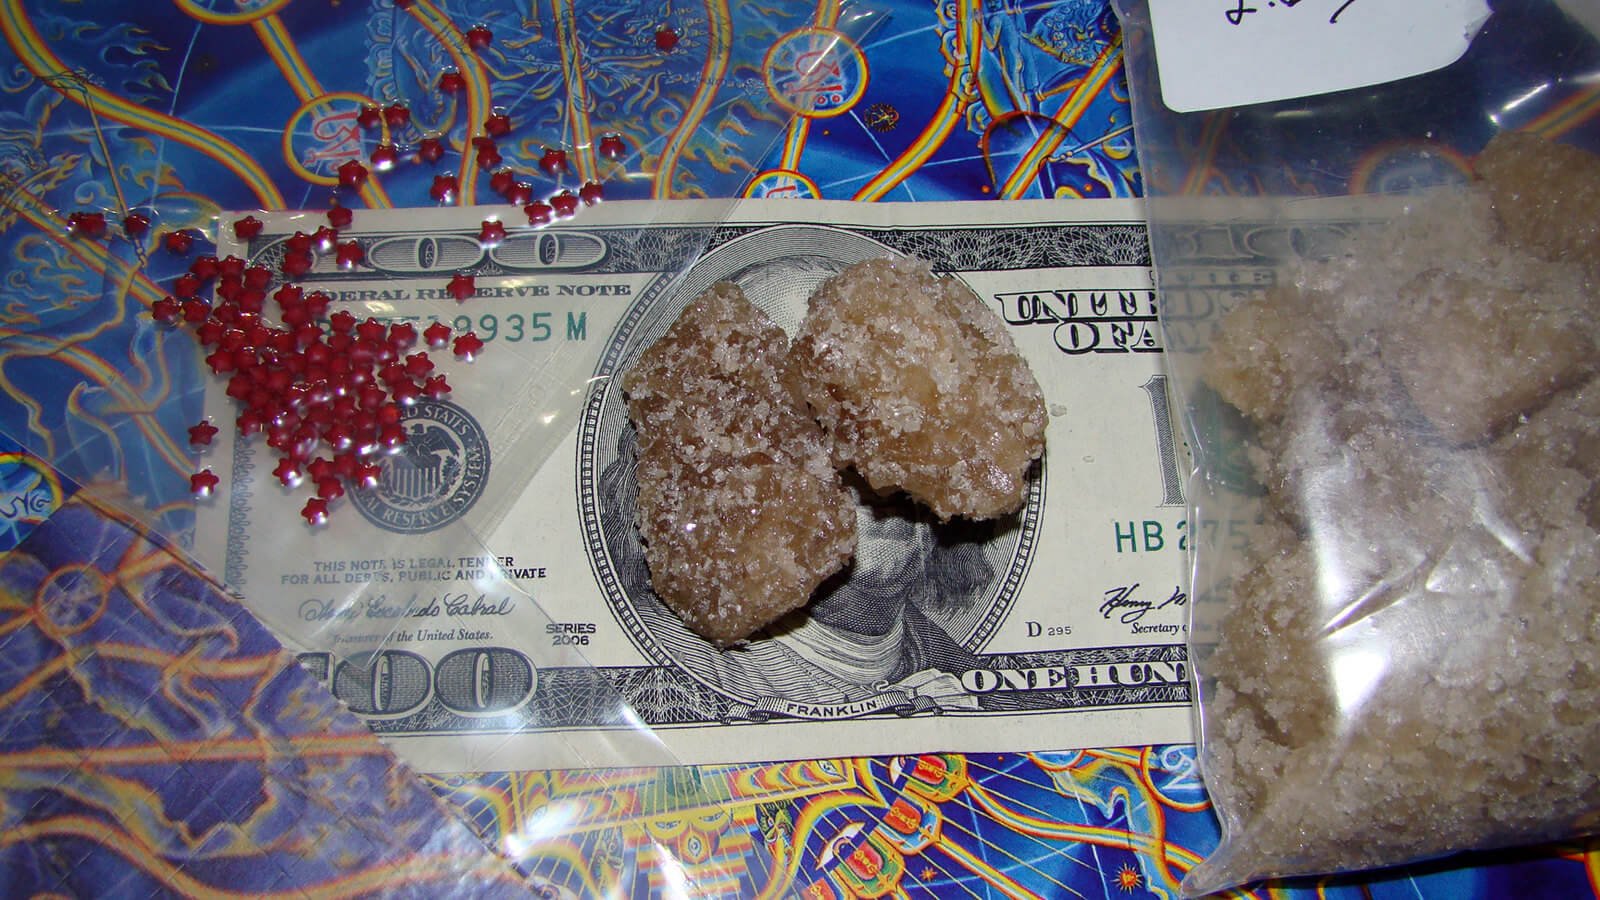 Drugs bought on the road - MDMA crystals and some LSD microdots sitting on top of a 100 USD bill